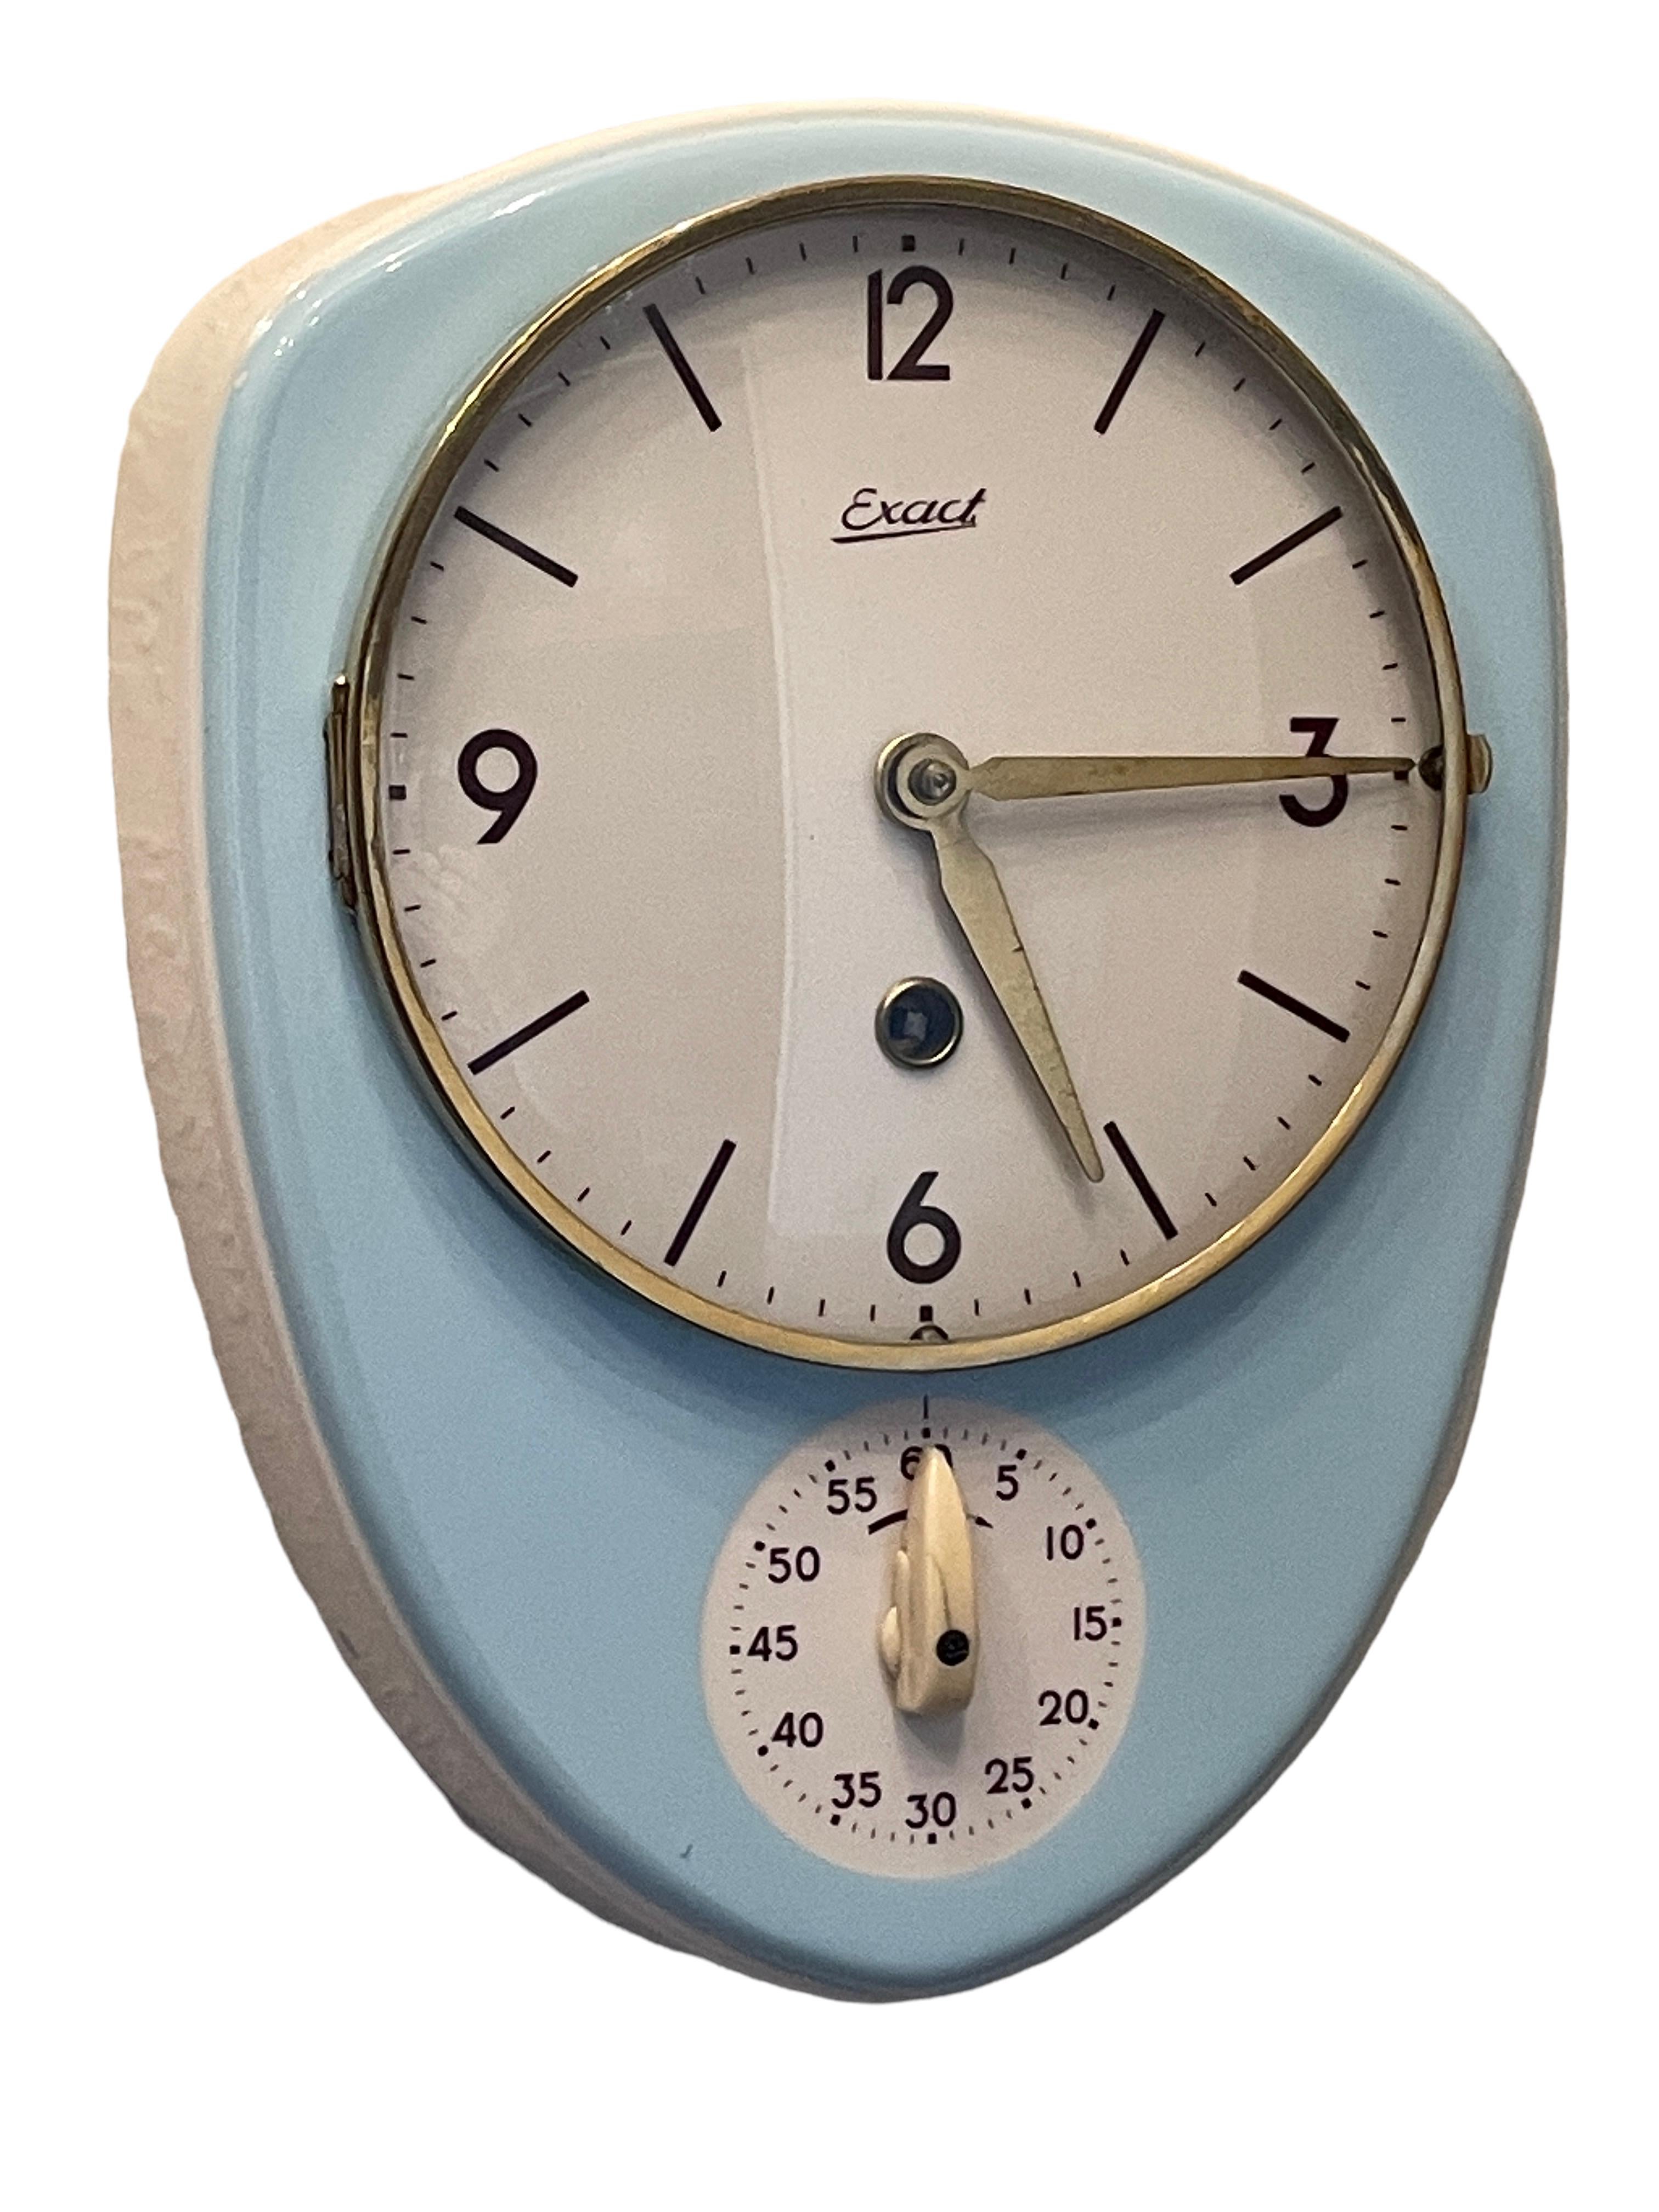 Stunning original important blue glazed ceramic kitchen clock designed and made by Exact, Germany, 1950s. This original old clock is a well-known design icon, shown in many important books and catalogues. This fantastic clock is in very good